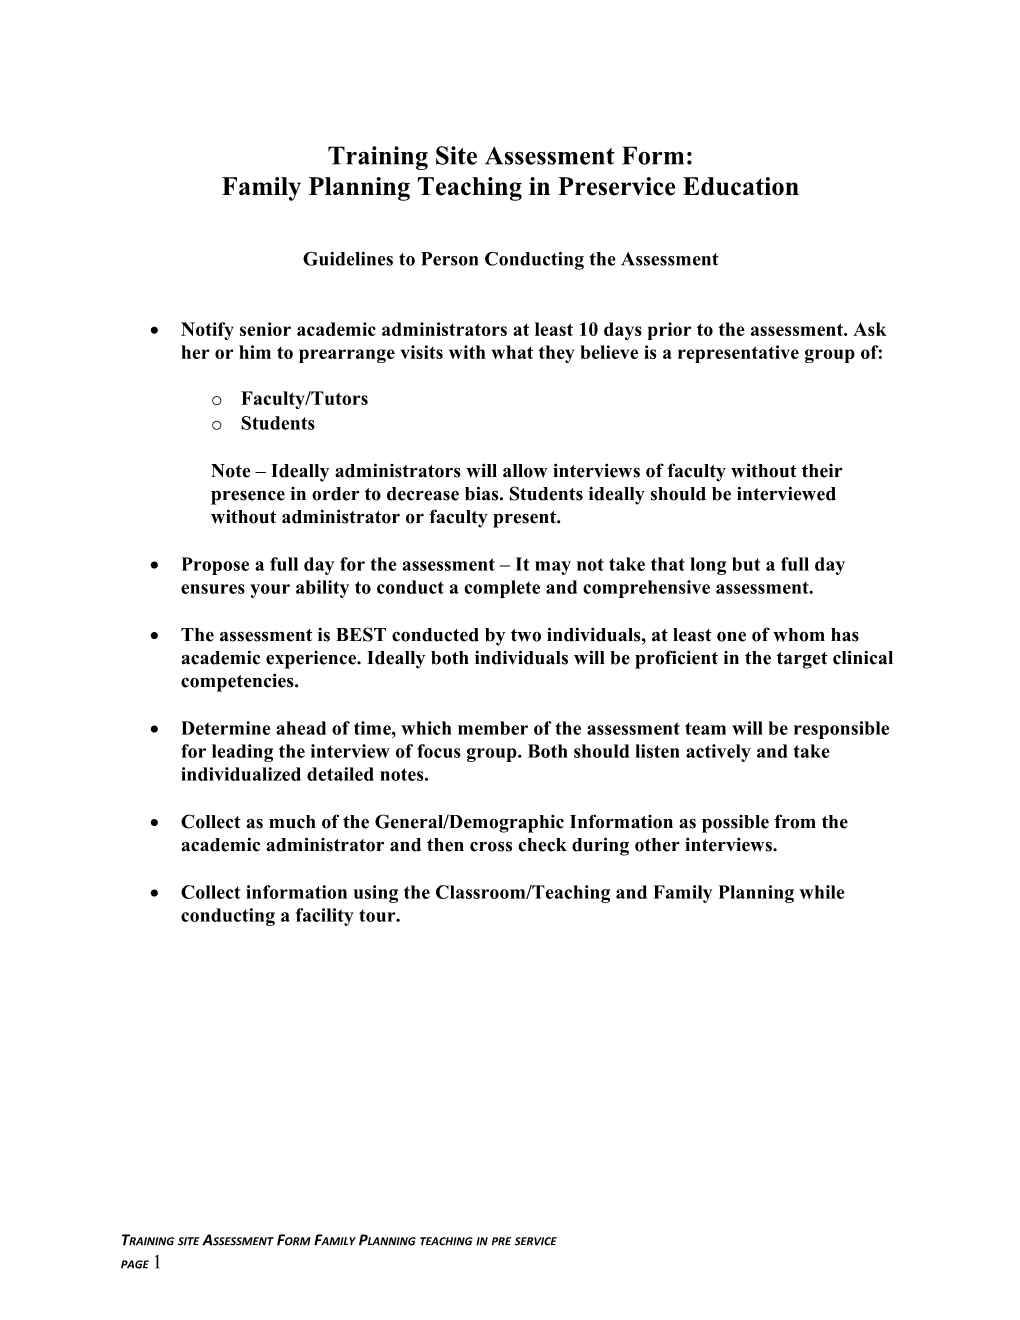 Training Site Assessment Form: Family Planning Teaching for Pre-Service